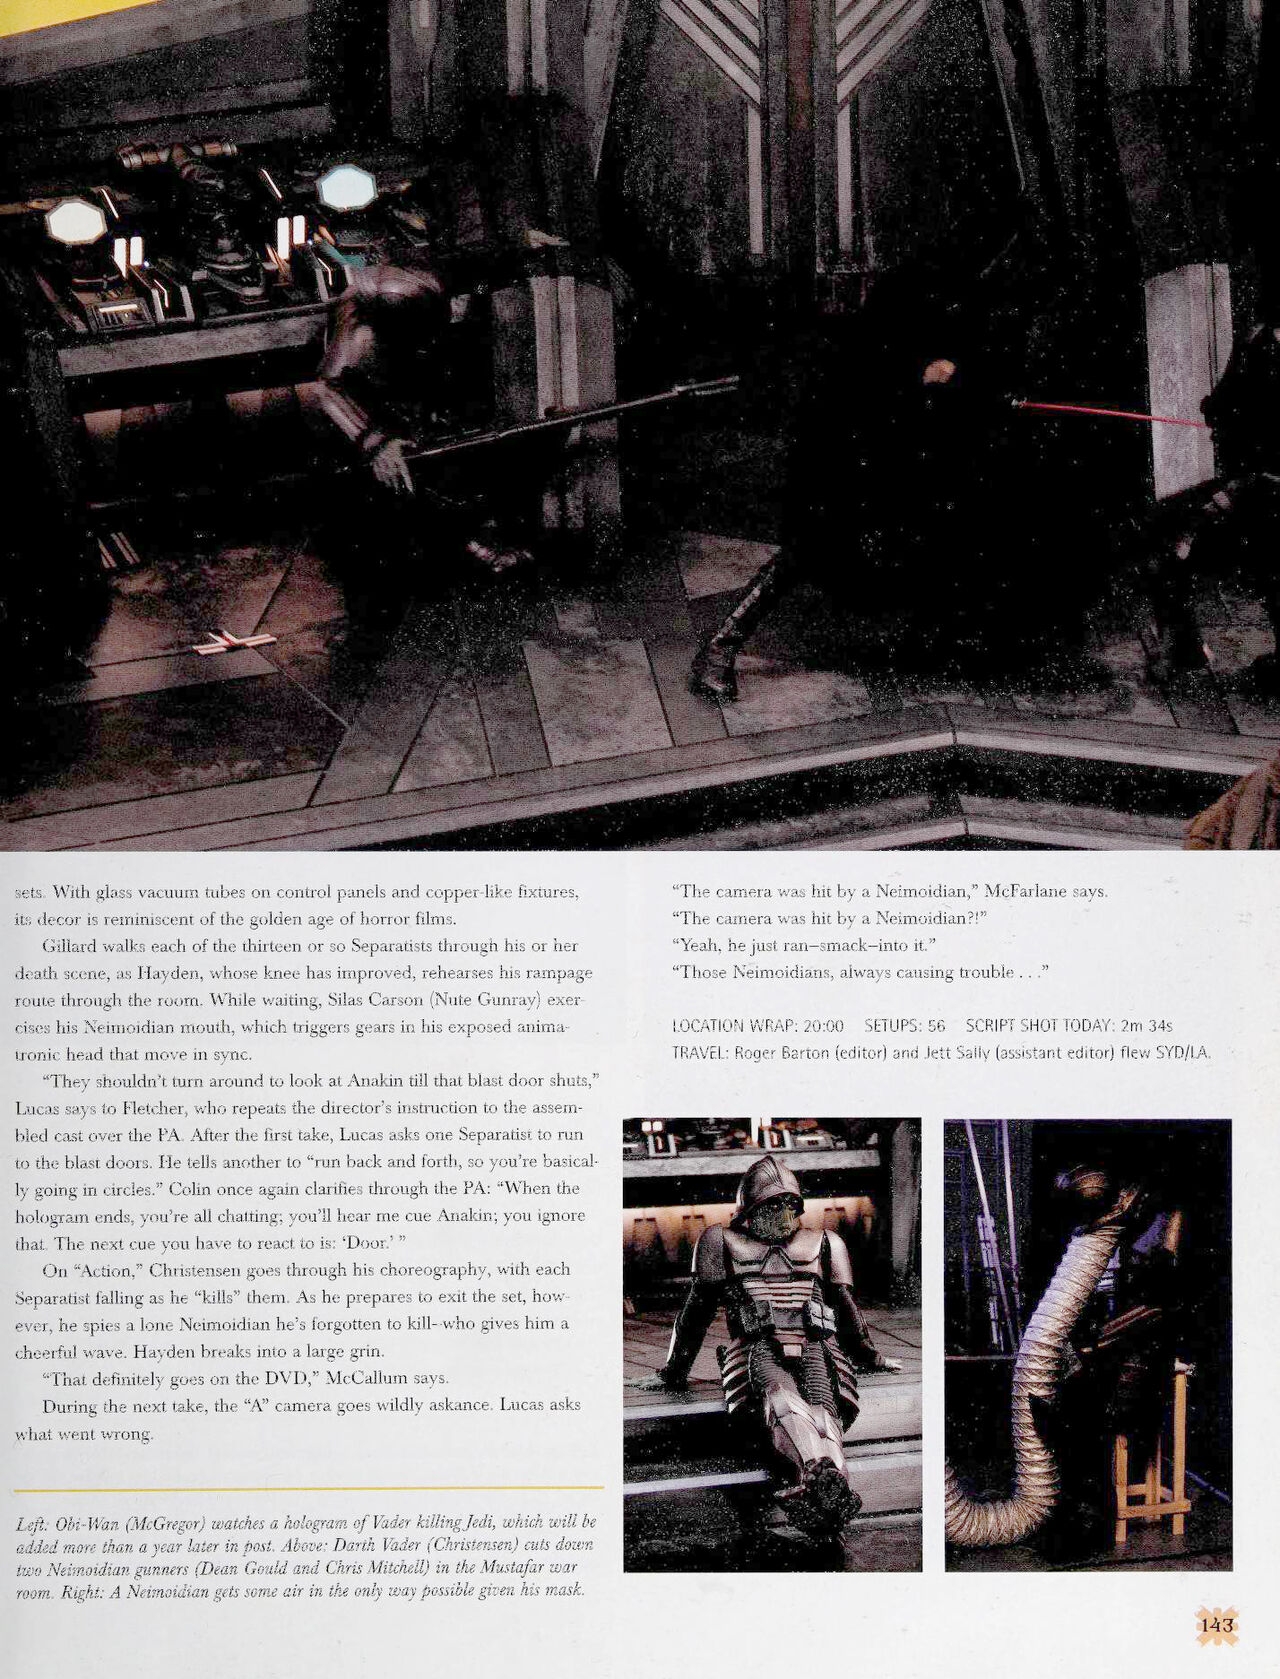 The Making of Star Wars: Revenge of the Sith 144